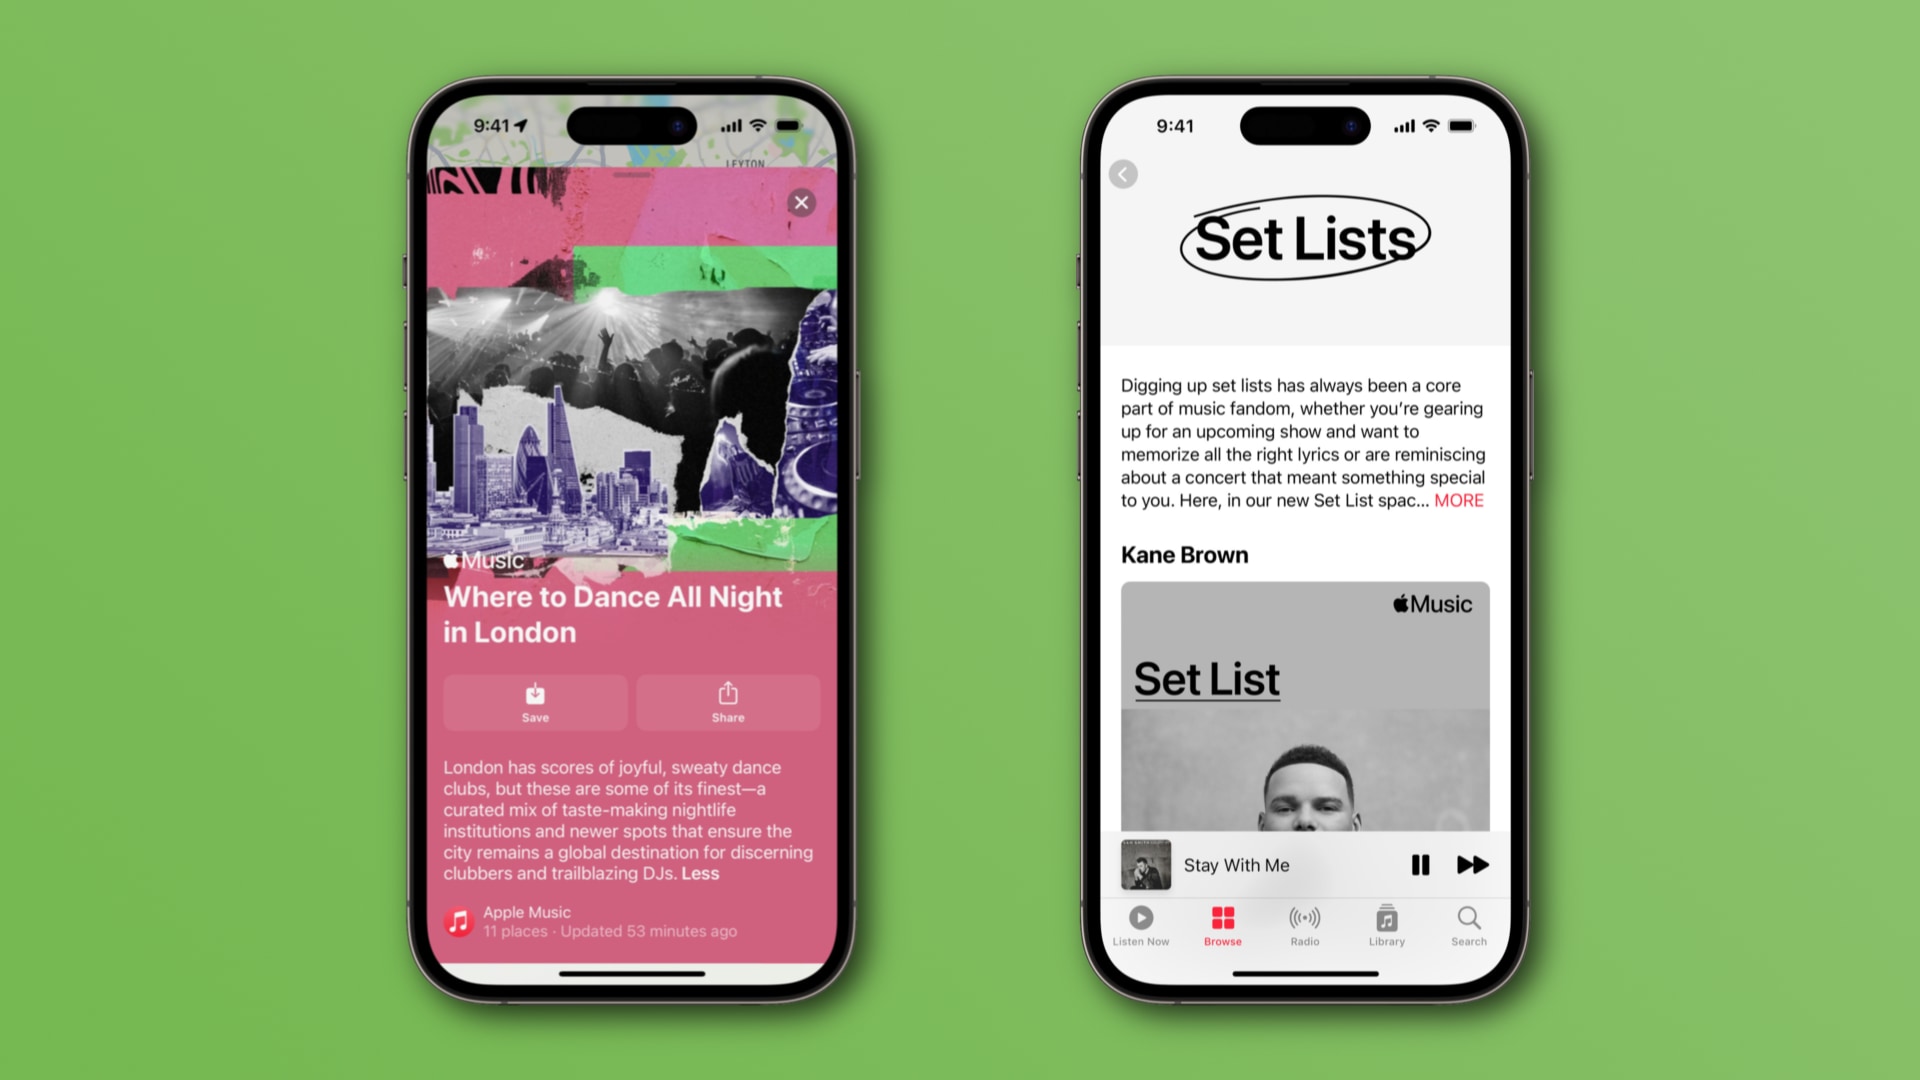 Two iPhone features showcasing concert discovery features on Apple Music and Maps